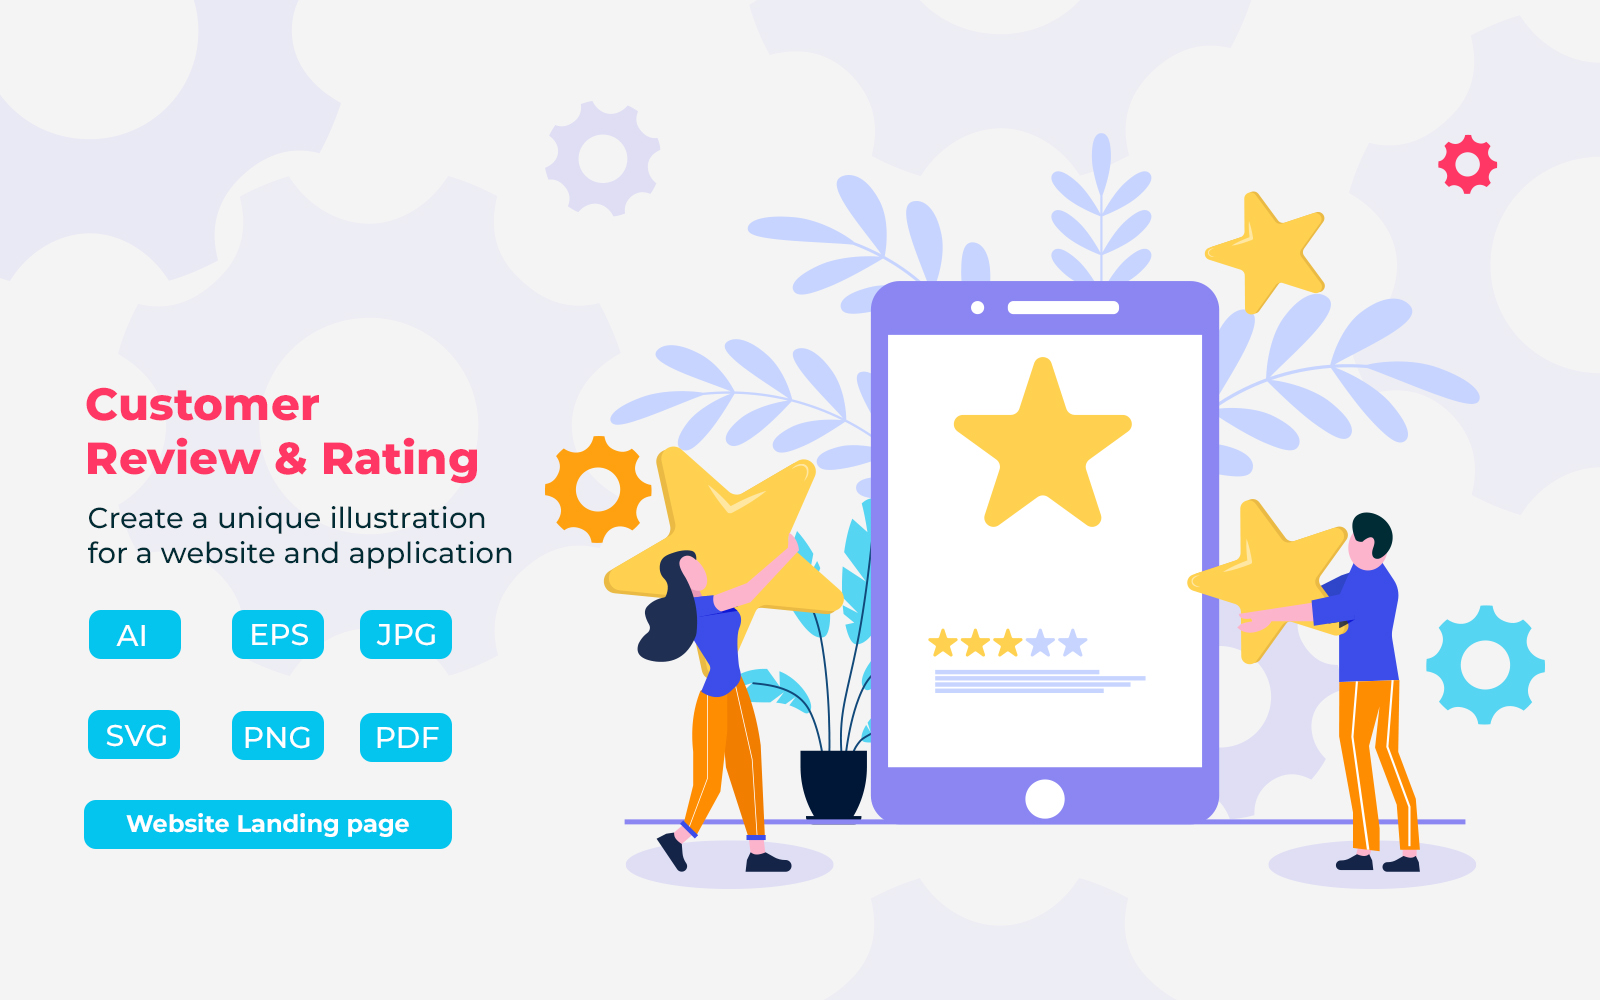 Customer Review & Rating concept illustration